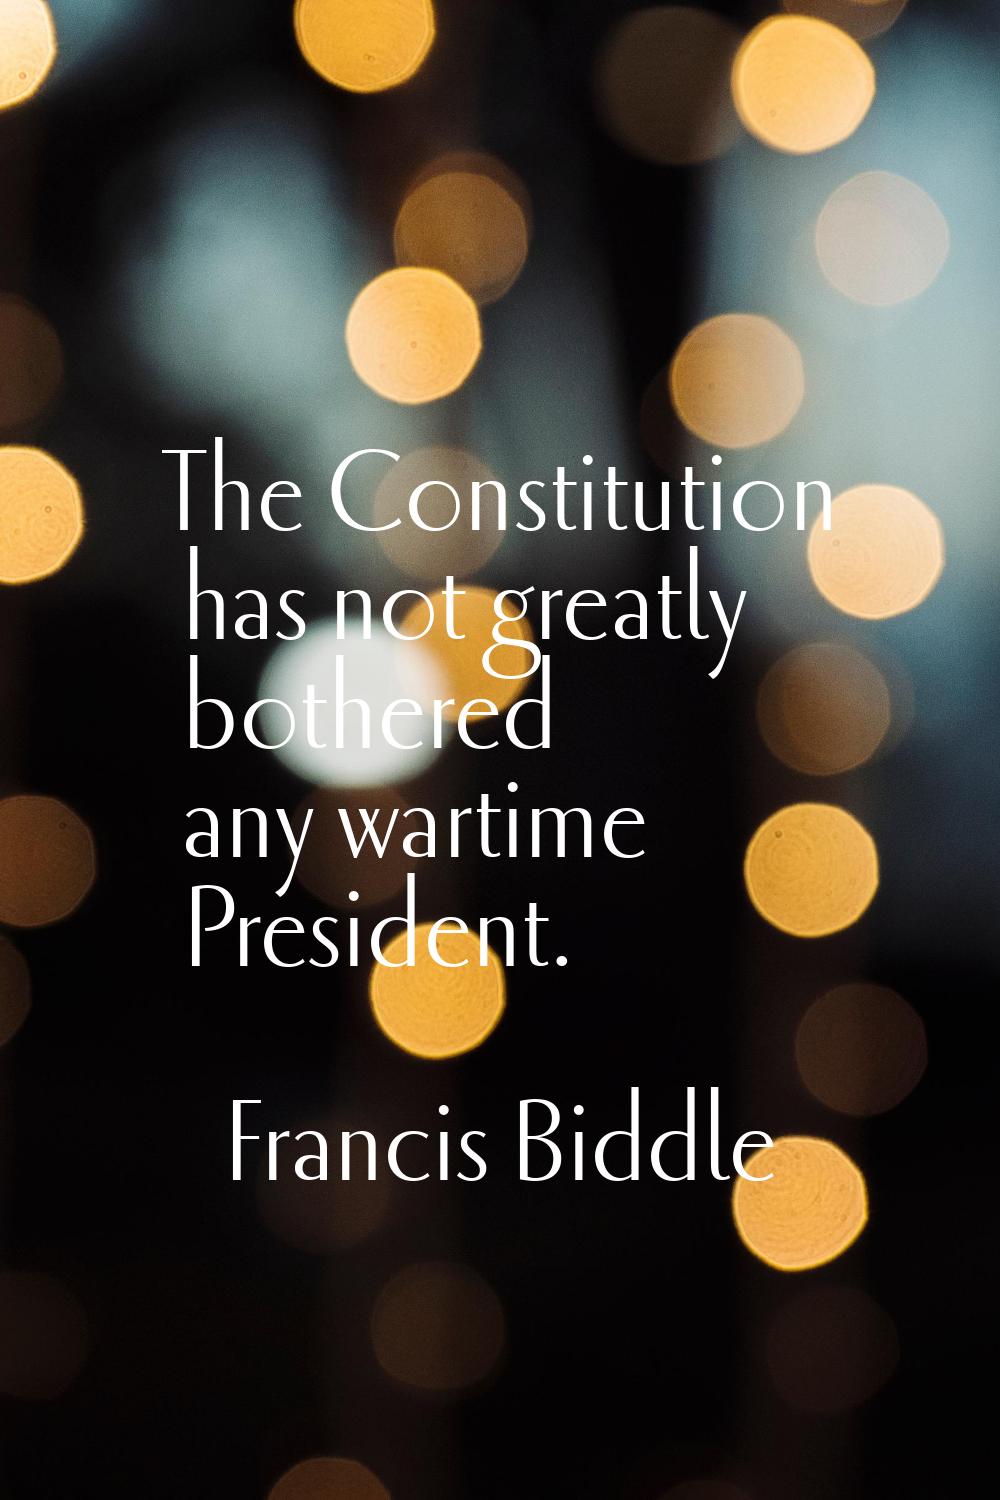 The Constitution has not greatly bothered any wartime President.